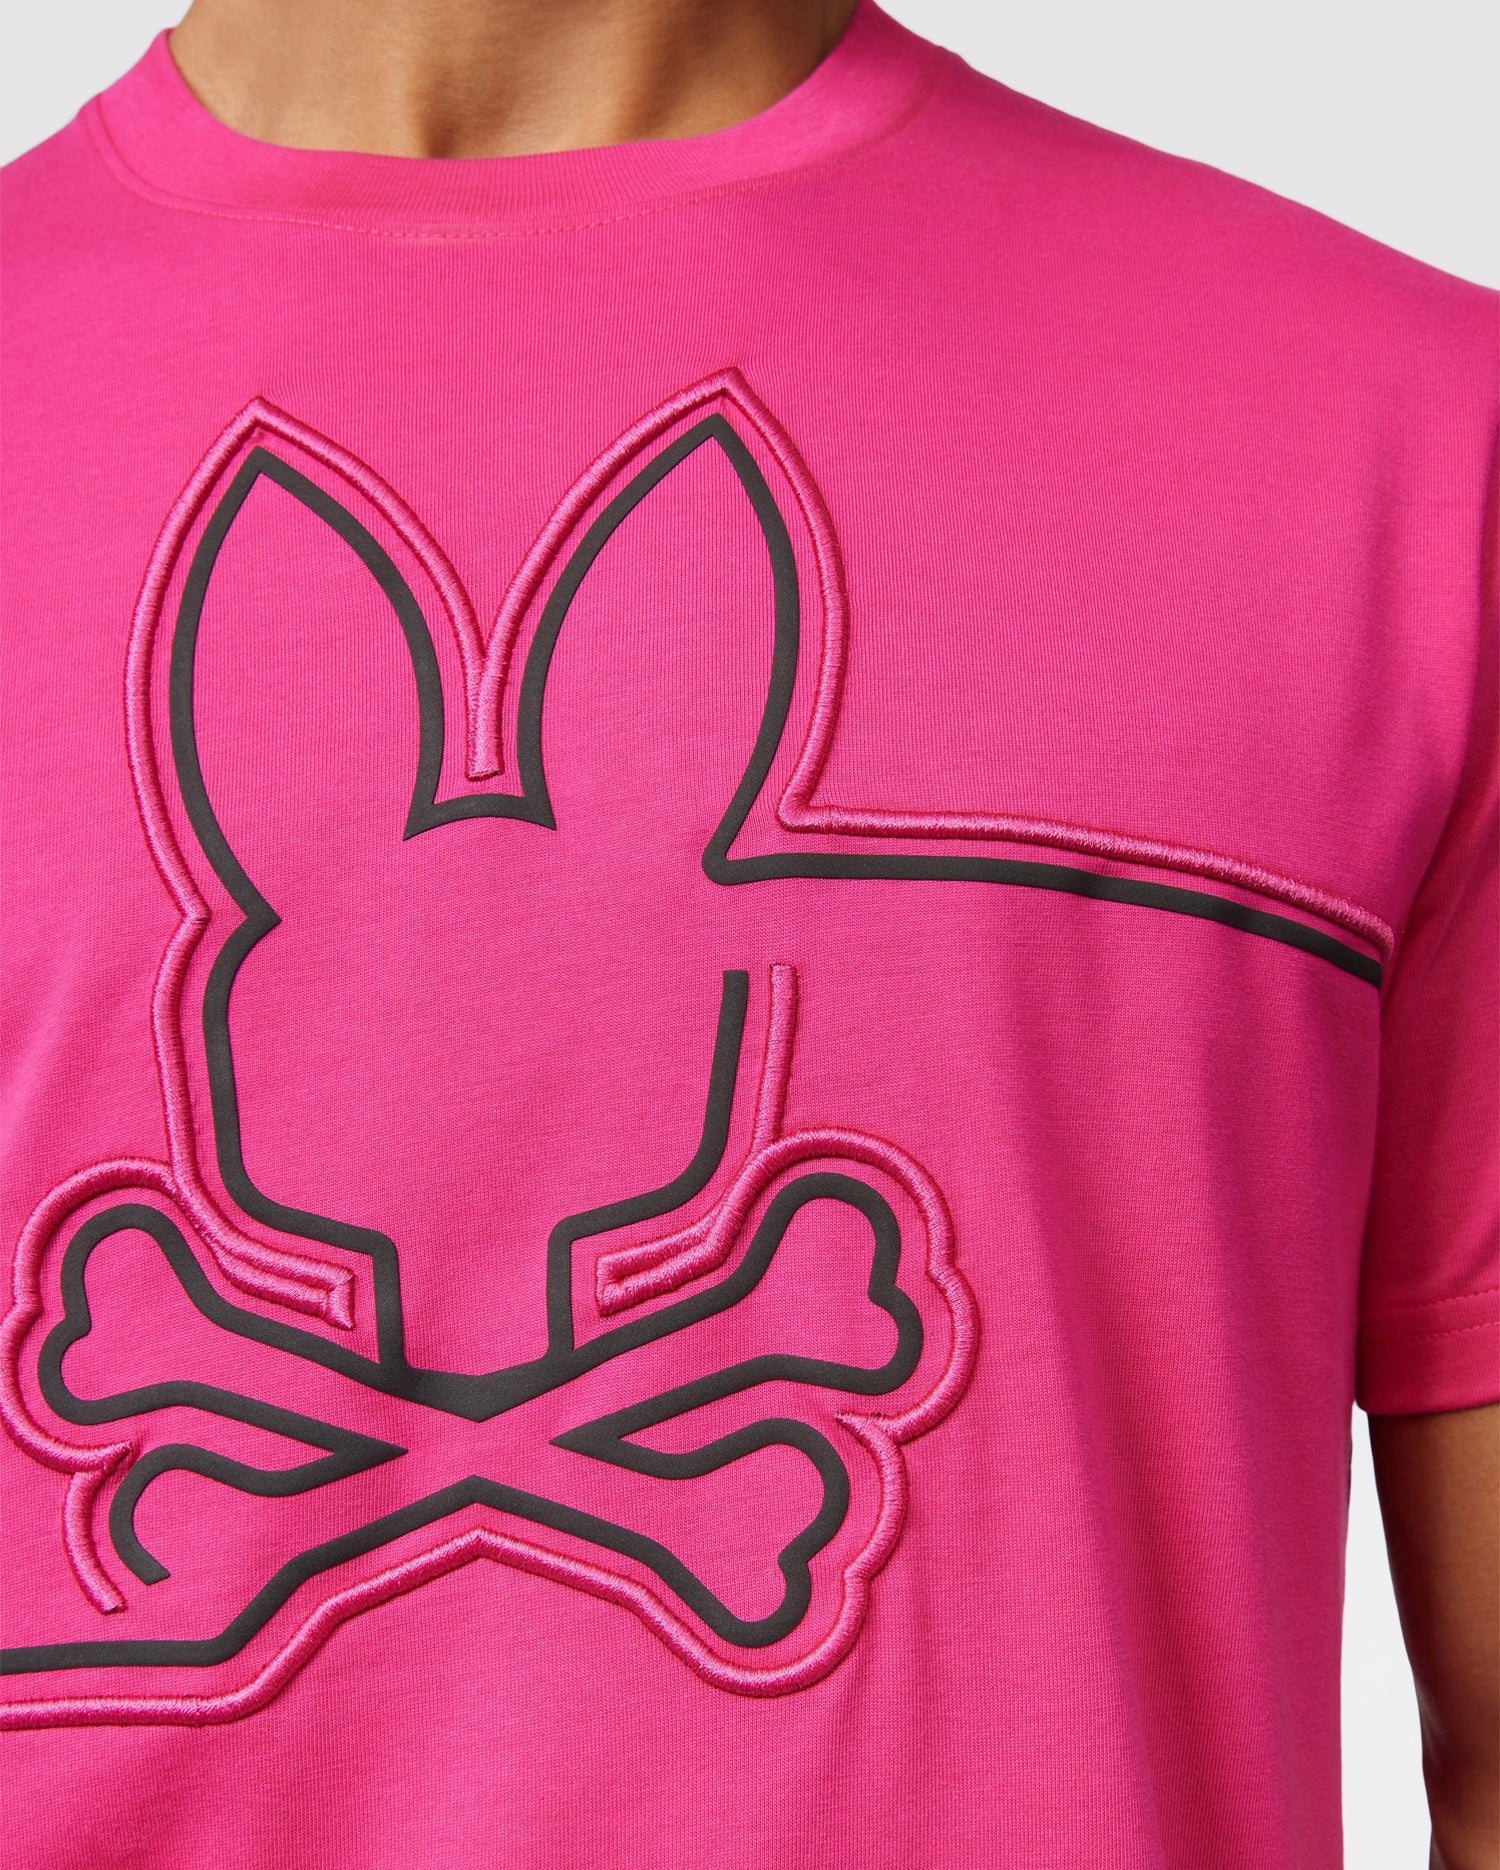 Graphic City Psycho Embroidered Sports | Chester Bunny Chicago Tee